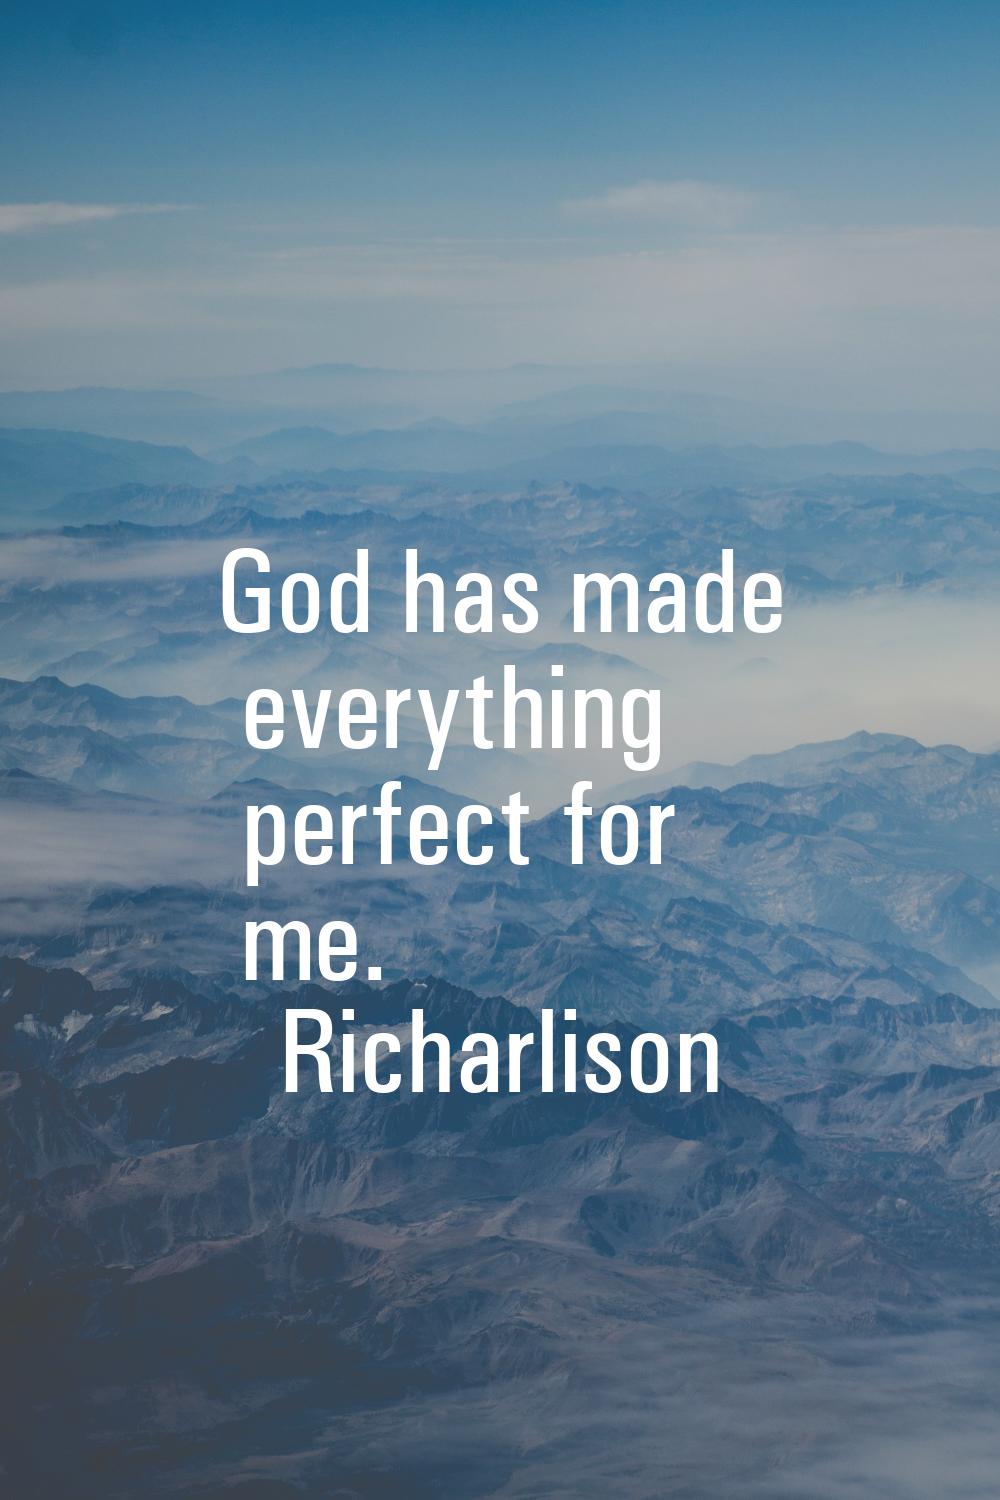 God has made everything perfect for me.